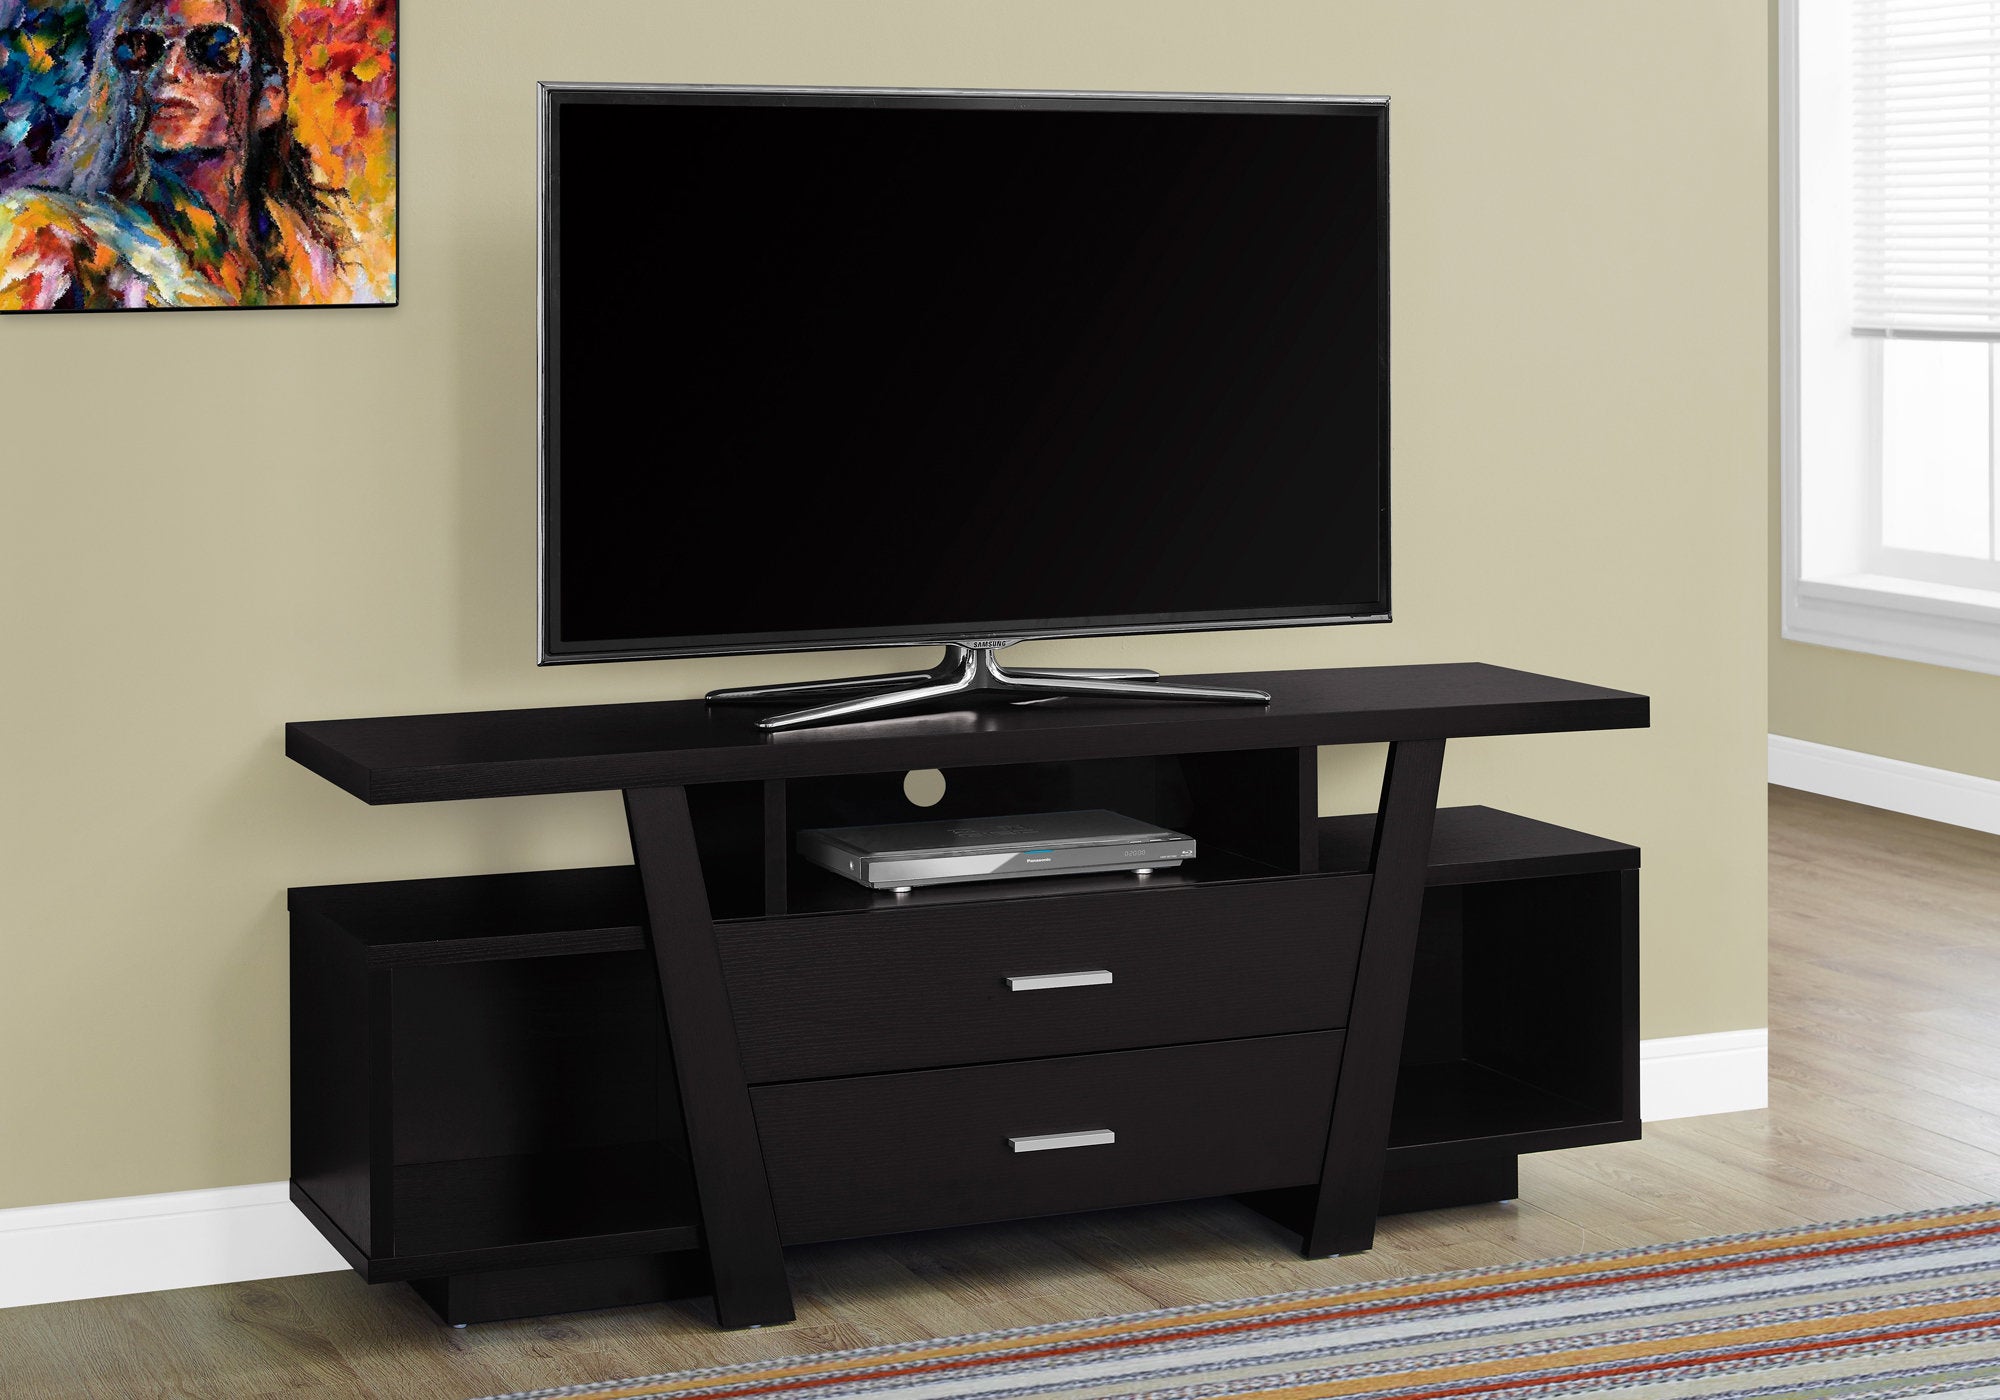 60" TV Stand with 2 Storage Drawers In Cappuccino